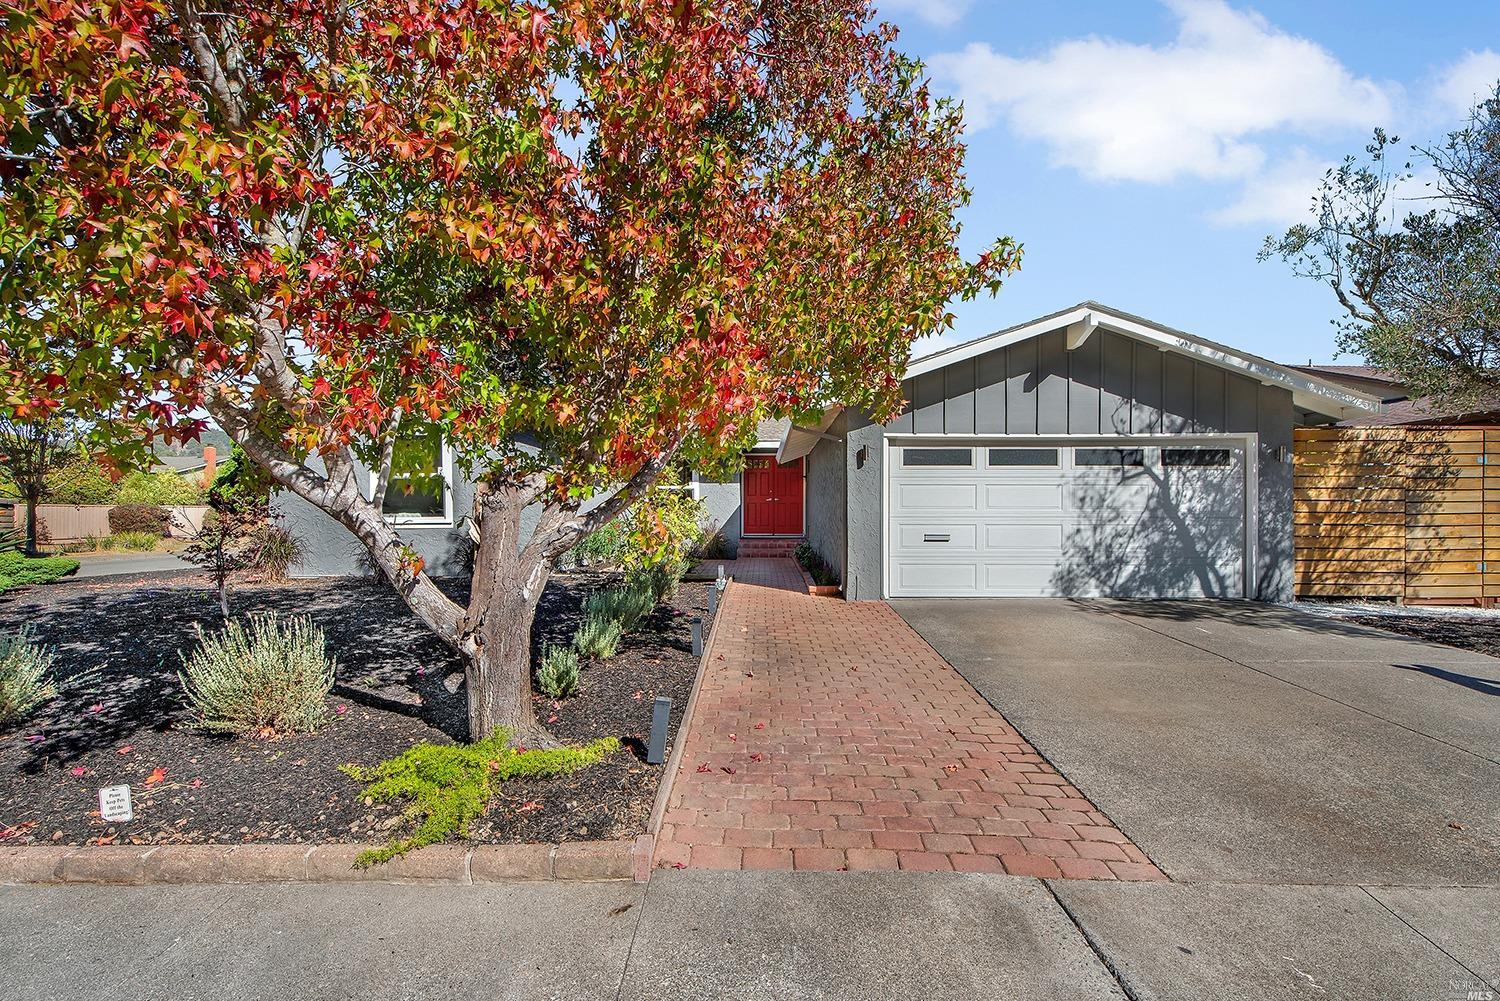 Welcome to 12 Main Drive, a fabulous corner lot home in coveted Surfwood neighborhood!